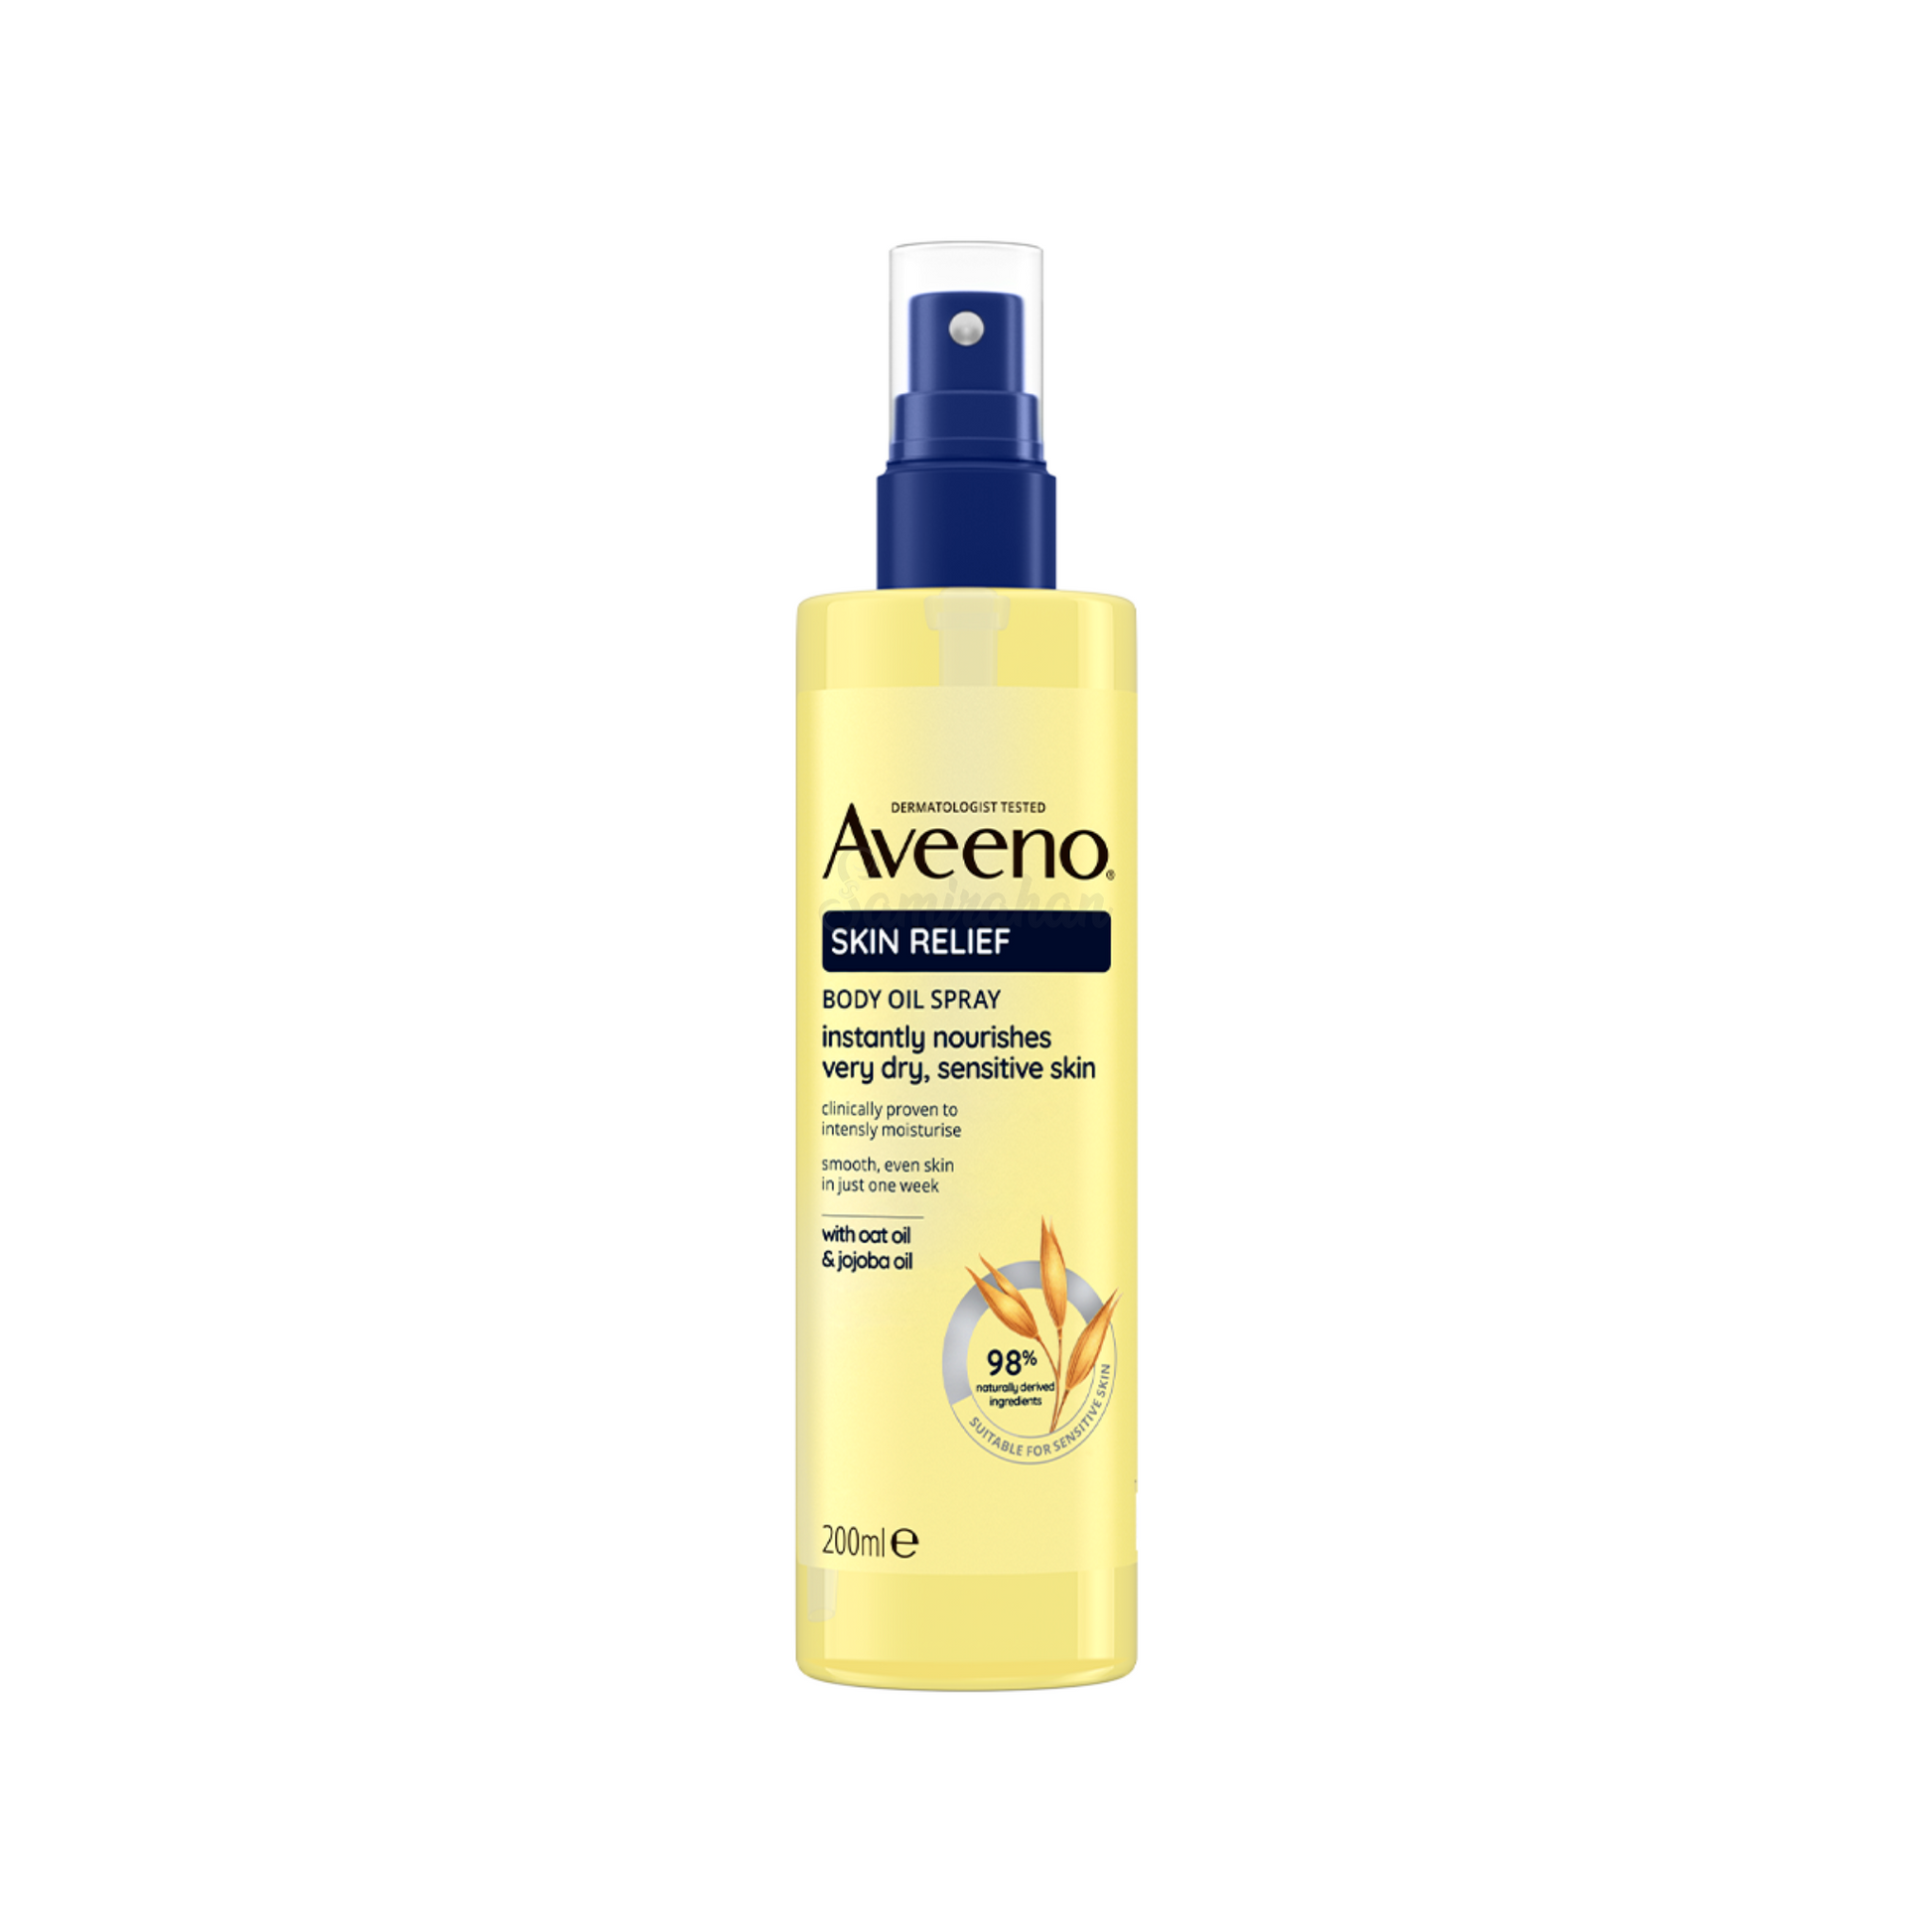 Aveeno Skin Relief Body Oil Spray helps relieve & repair very dry skin from the first application by providing a long-lasting moisturization. Its unique formula contains oat oil & jojoba oil, which are ingredients rich in lipids & fatty acids that help restore the skin barrier. Imported from UK. Best body oil in Dhaka.